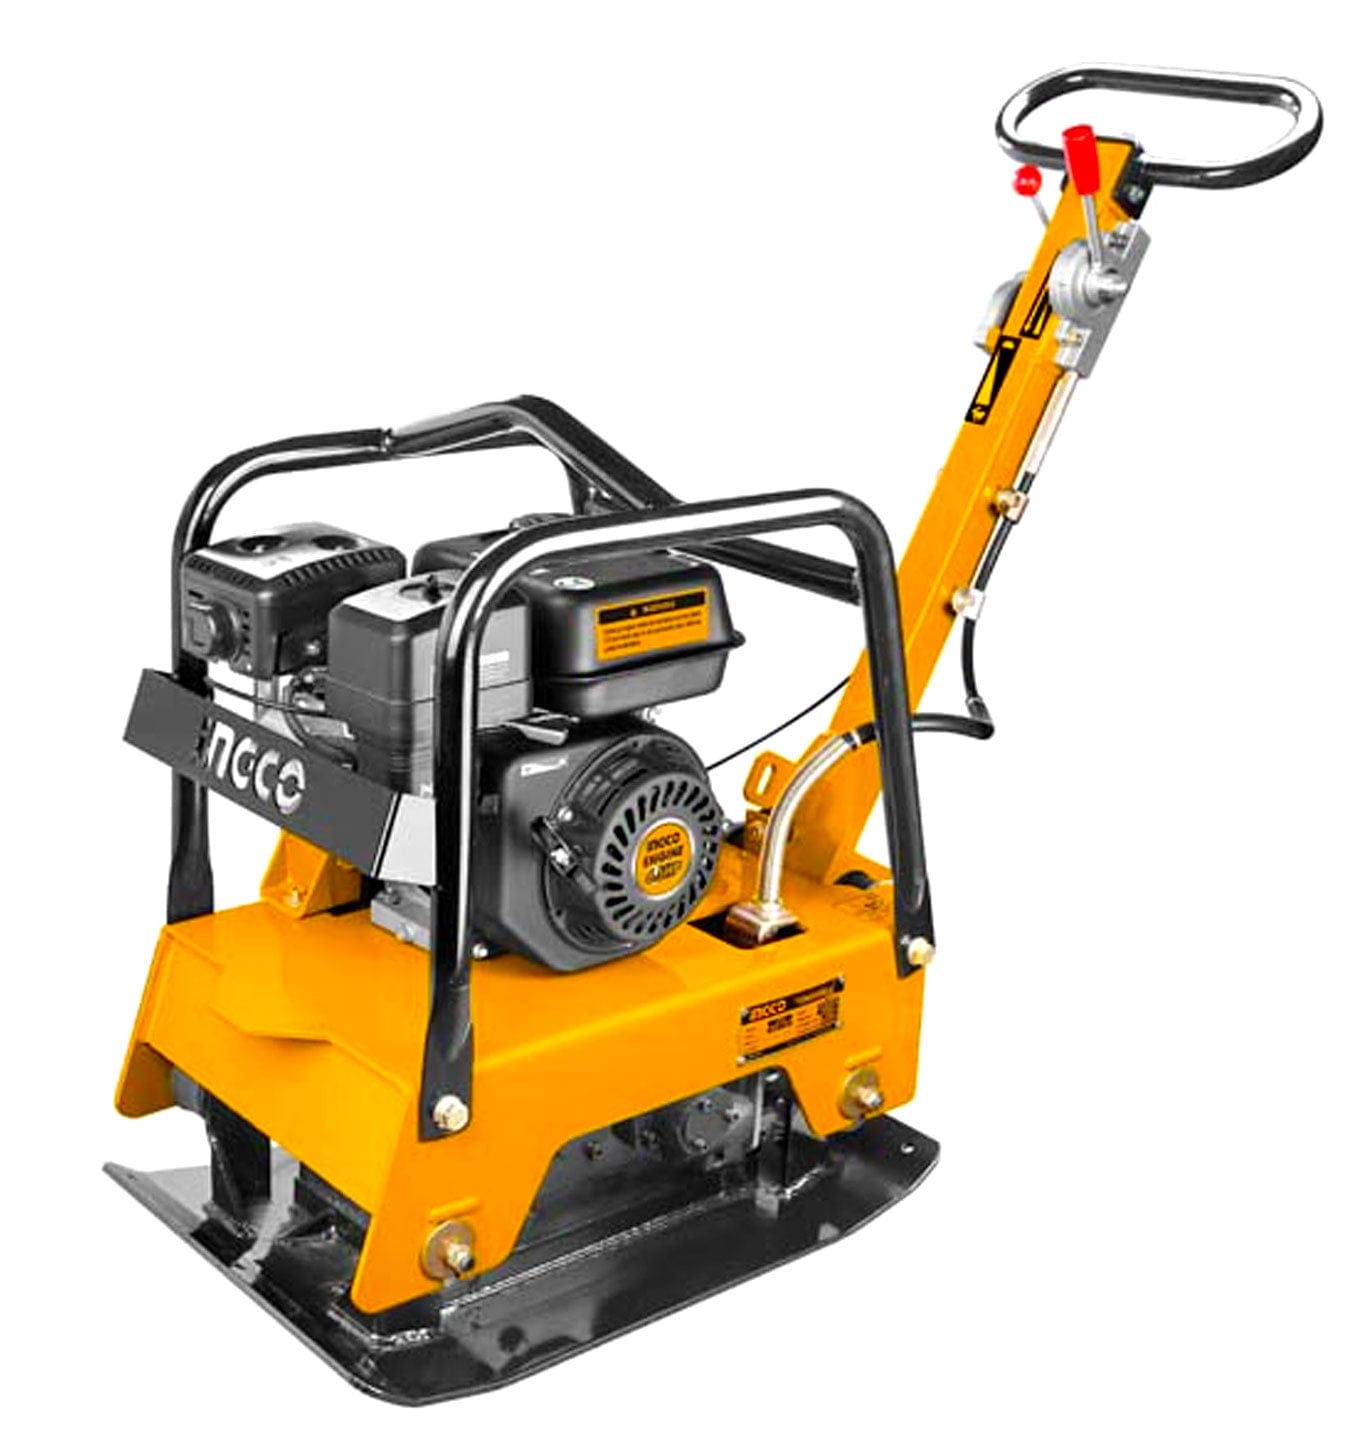 Buy Ingco Gasoline Plate Compactor 4.8 KW (6.5HP) 127Kg - GCP125-2 in Ghana | Supply Master Construction Equipment Buy Tools hardware Building materials